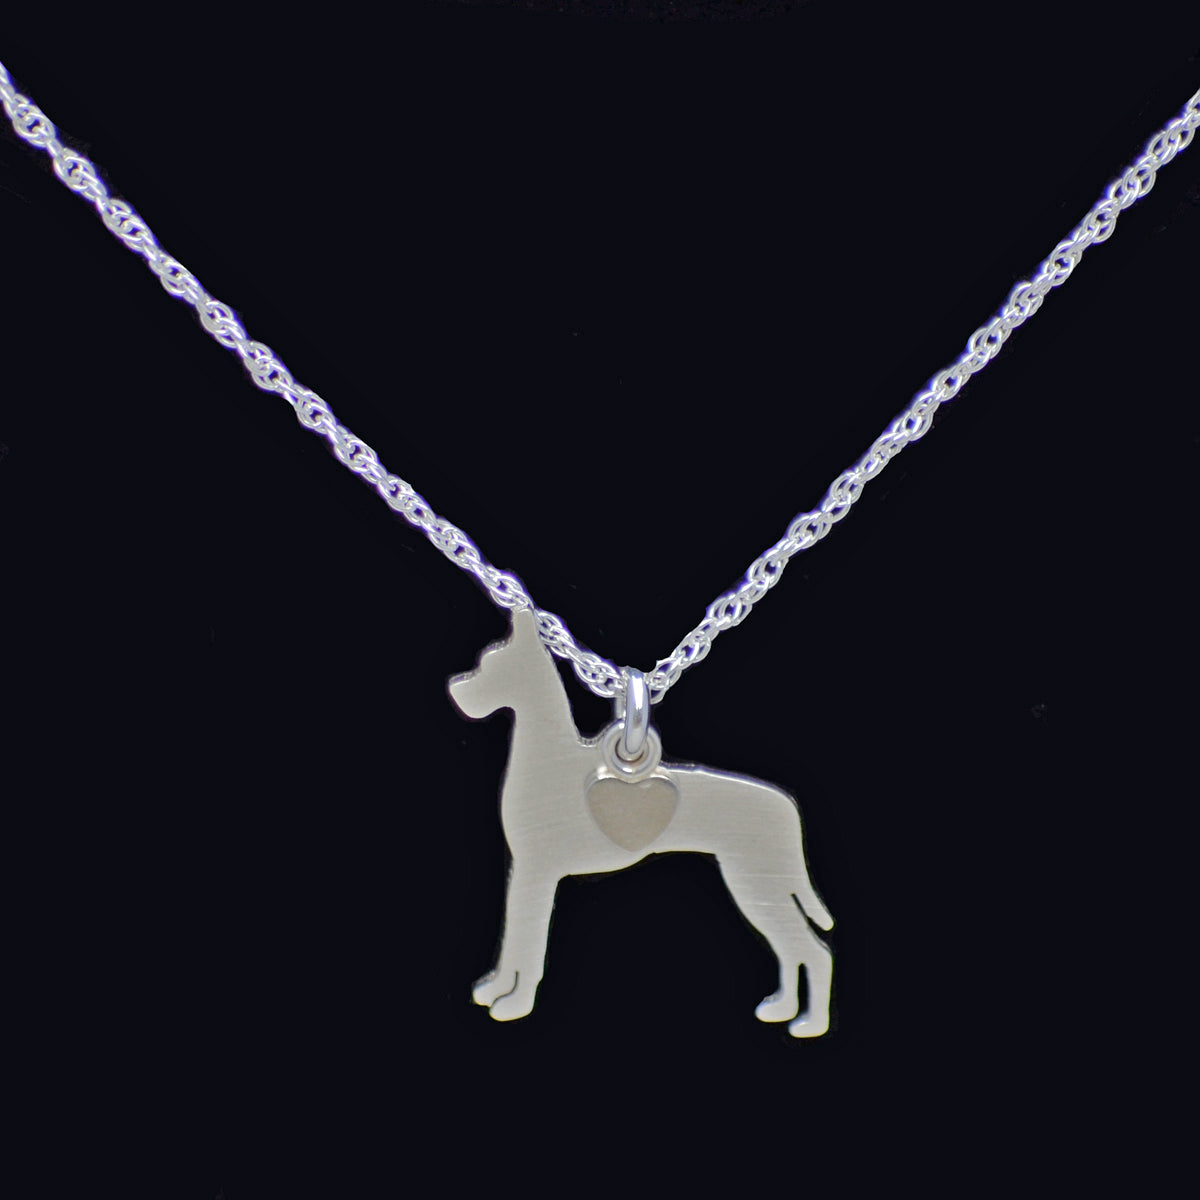 "Sterling Silver Great Dane Pendant and 18" Chain"